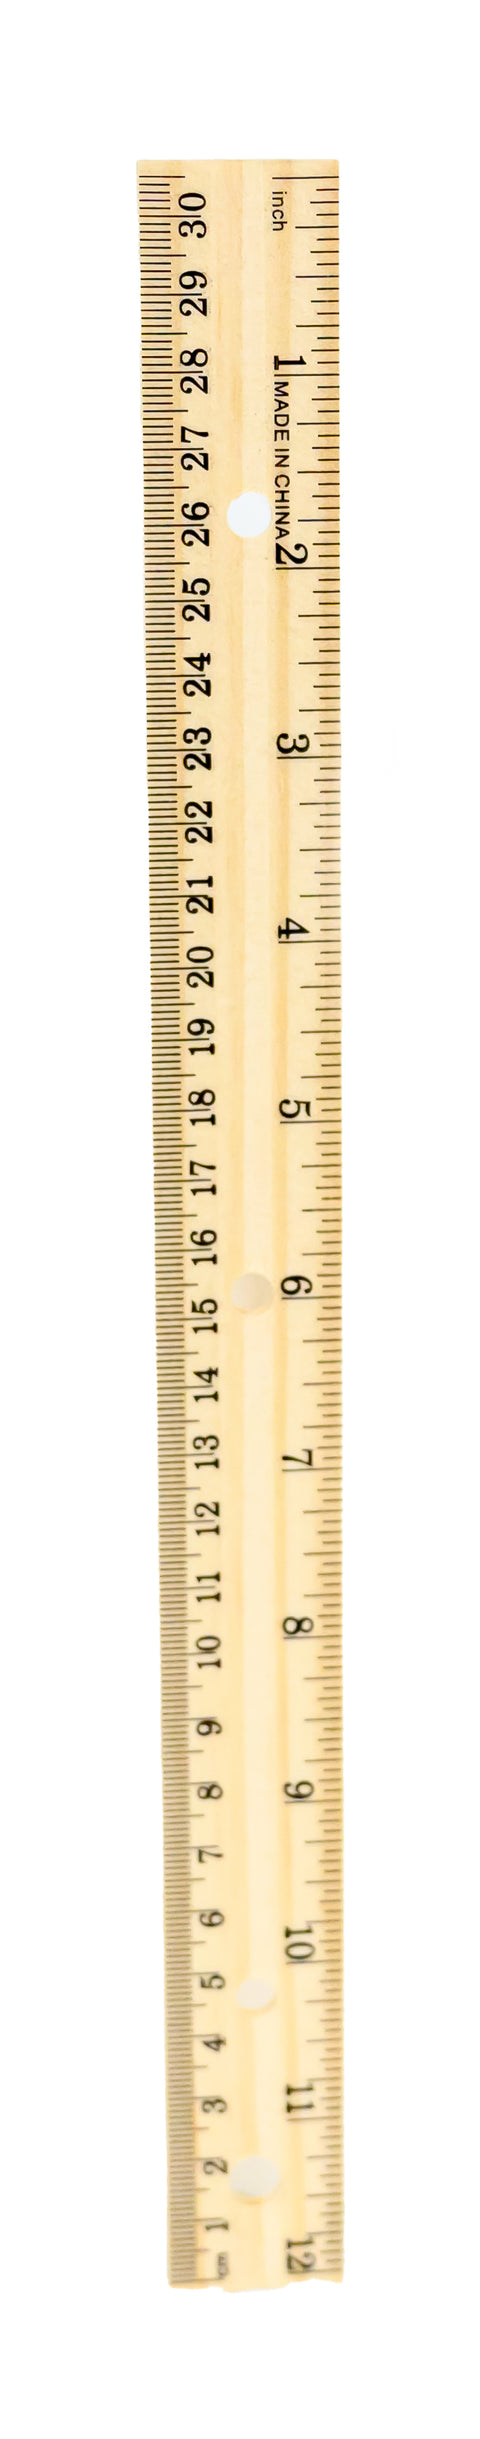 12" Wooden Ruler with 3-Ring Binder Holes